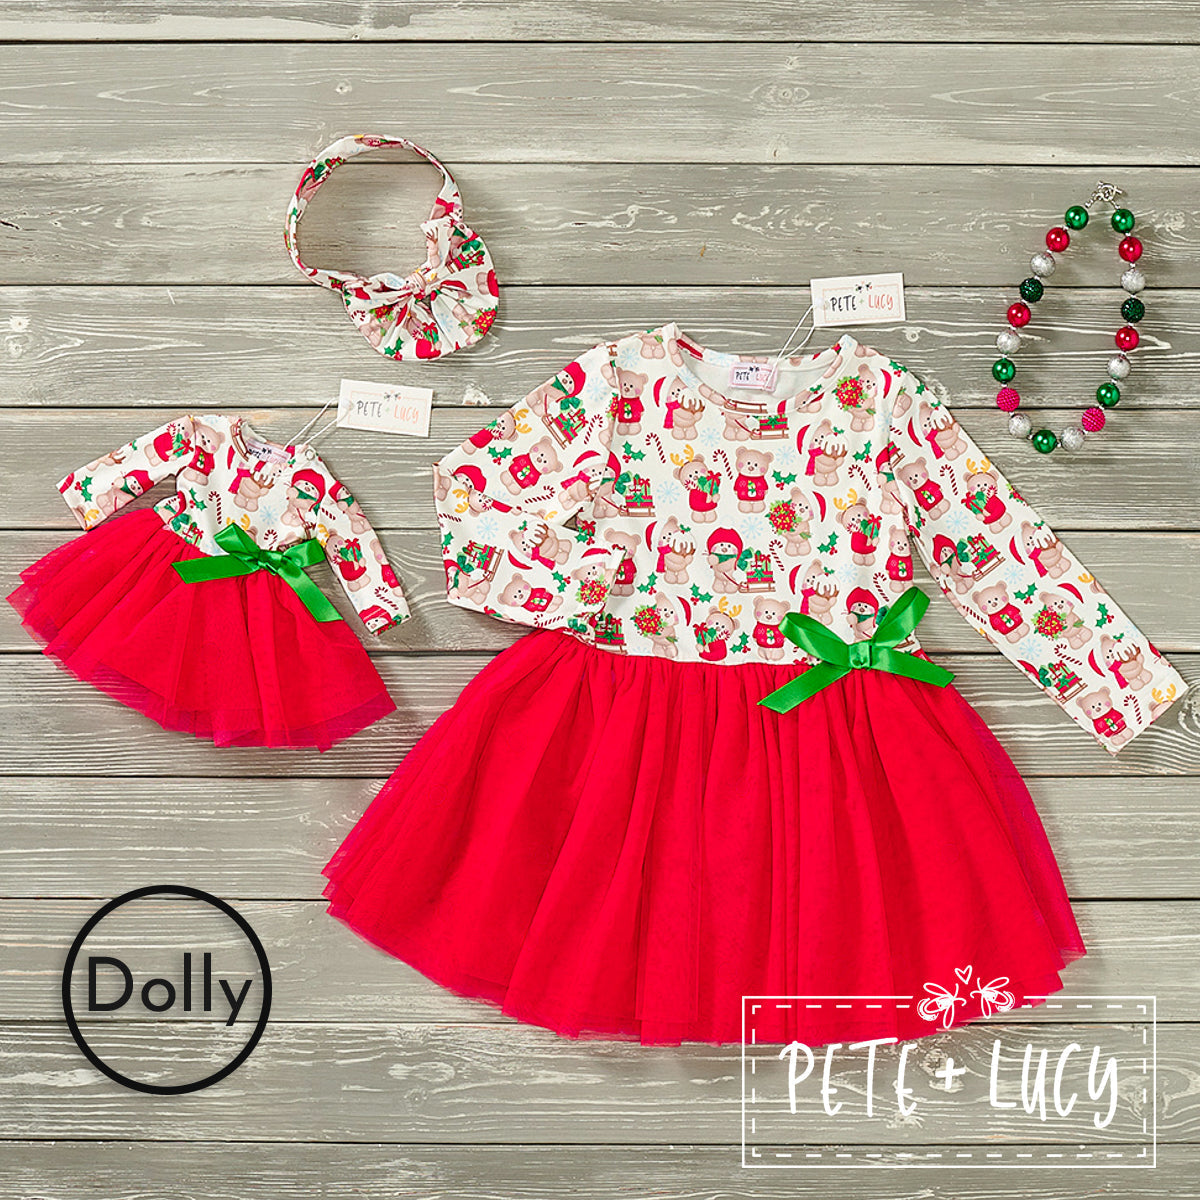 Christmas Family: Dolly Dress by Pete and Lucy